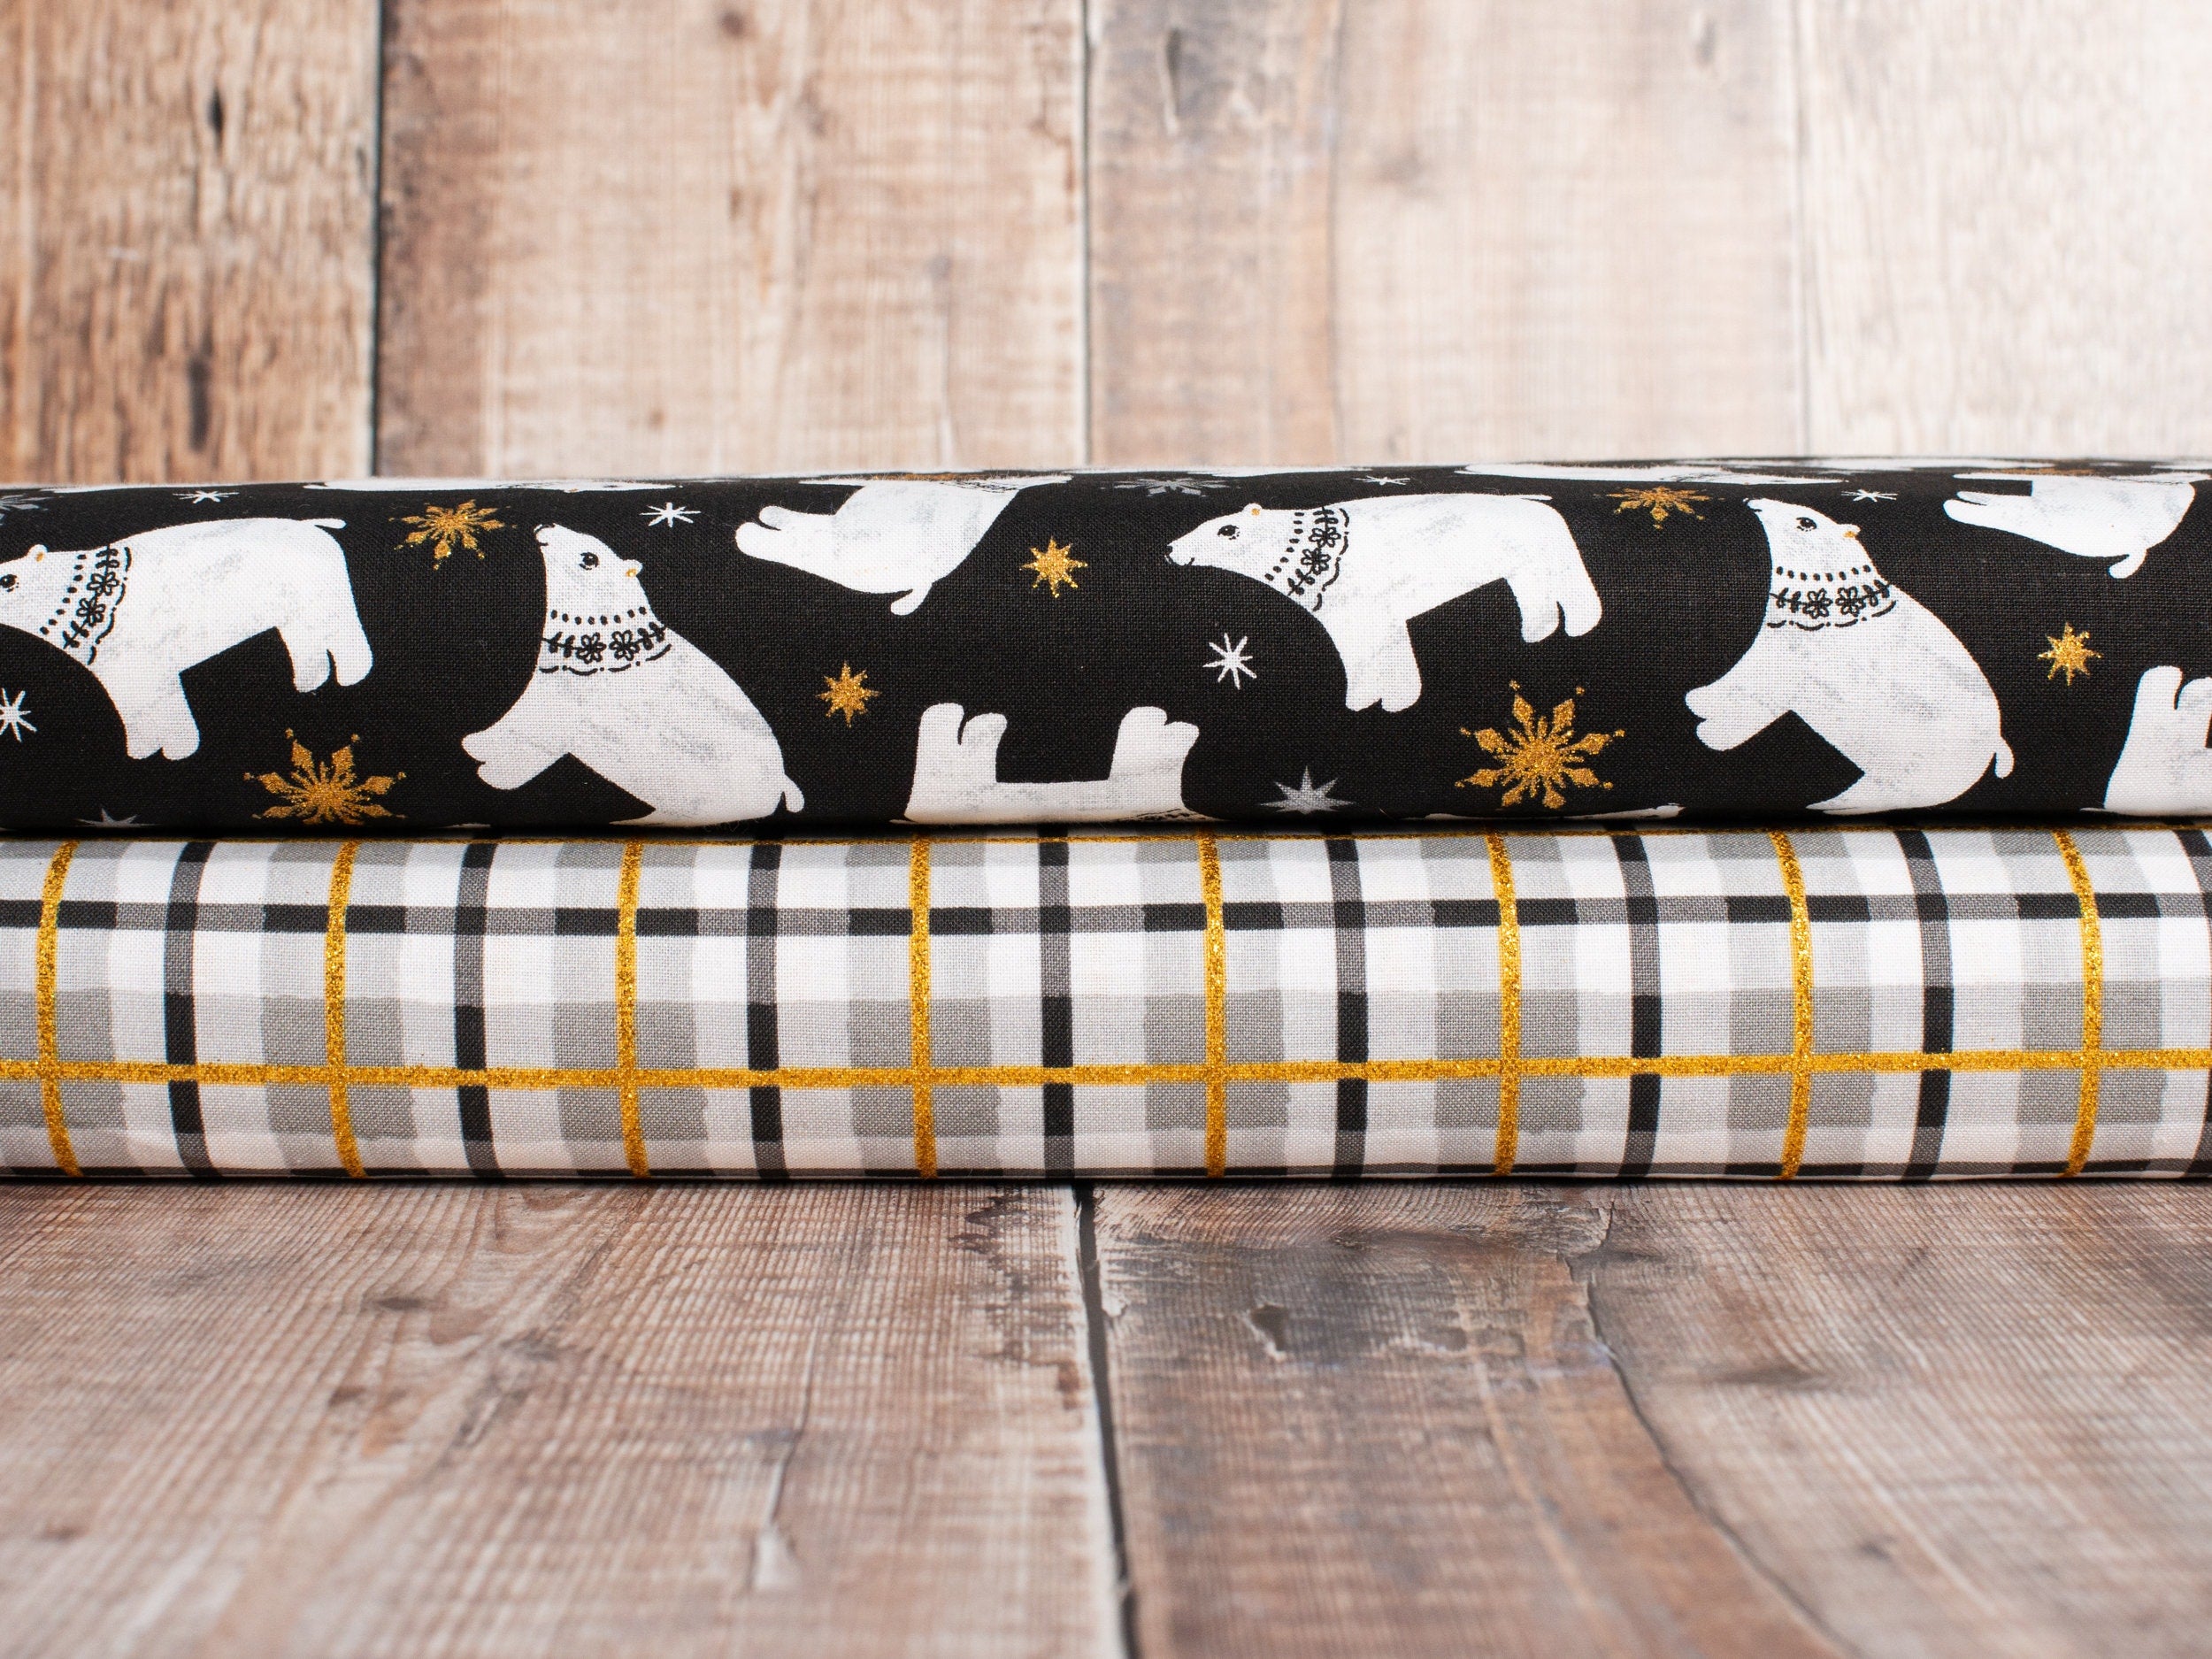 White, black and gold tartan plaid cotton fabric - 3 Wishes